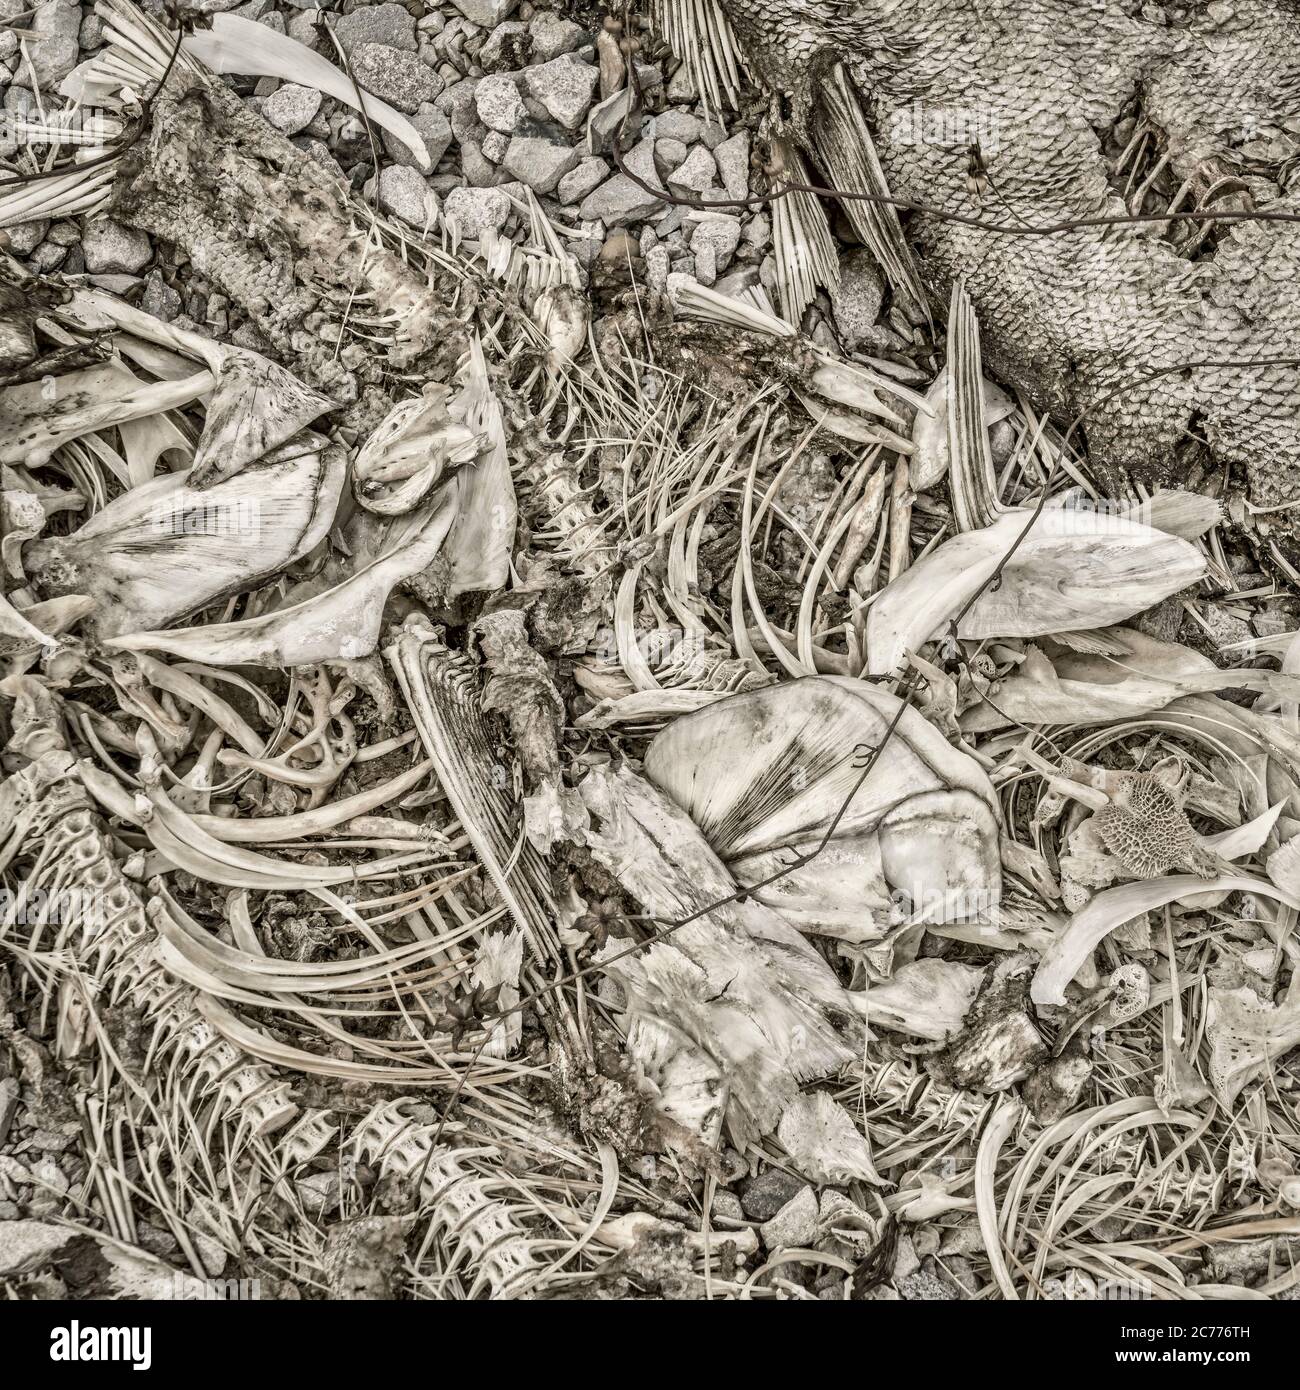 fish bones and remains left on a river shore by herons, square format black and white image with platinum toning Stock Photo